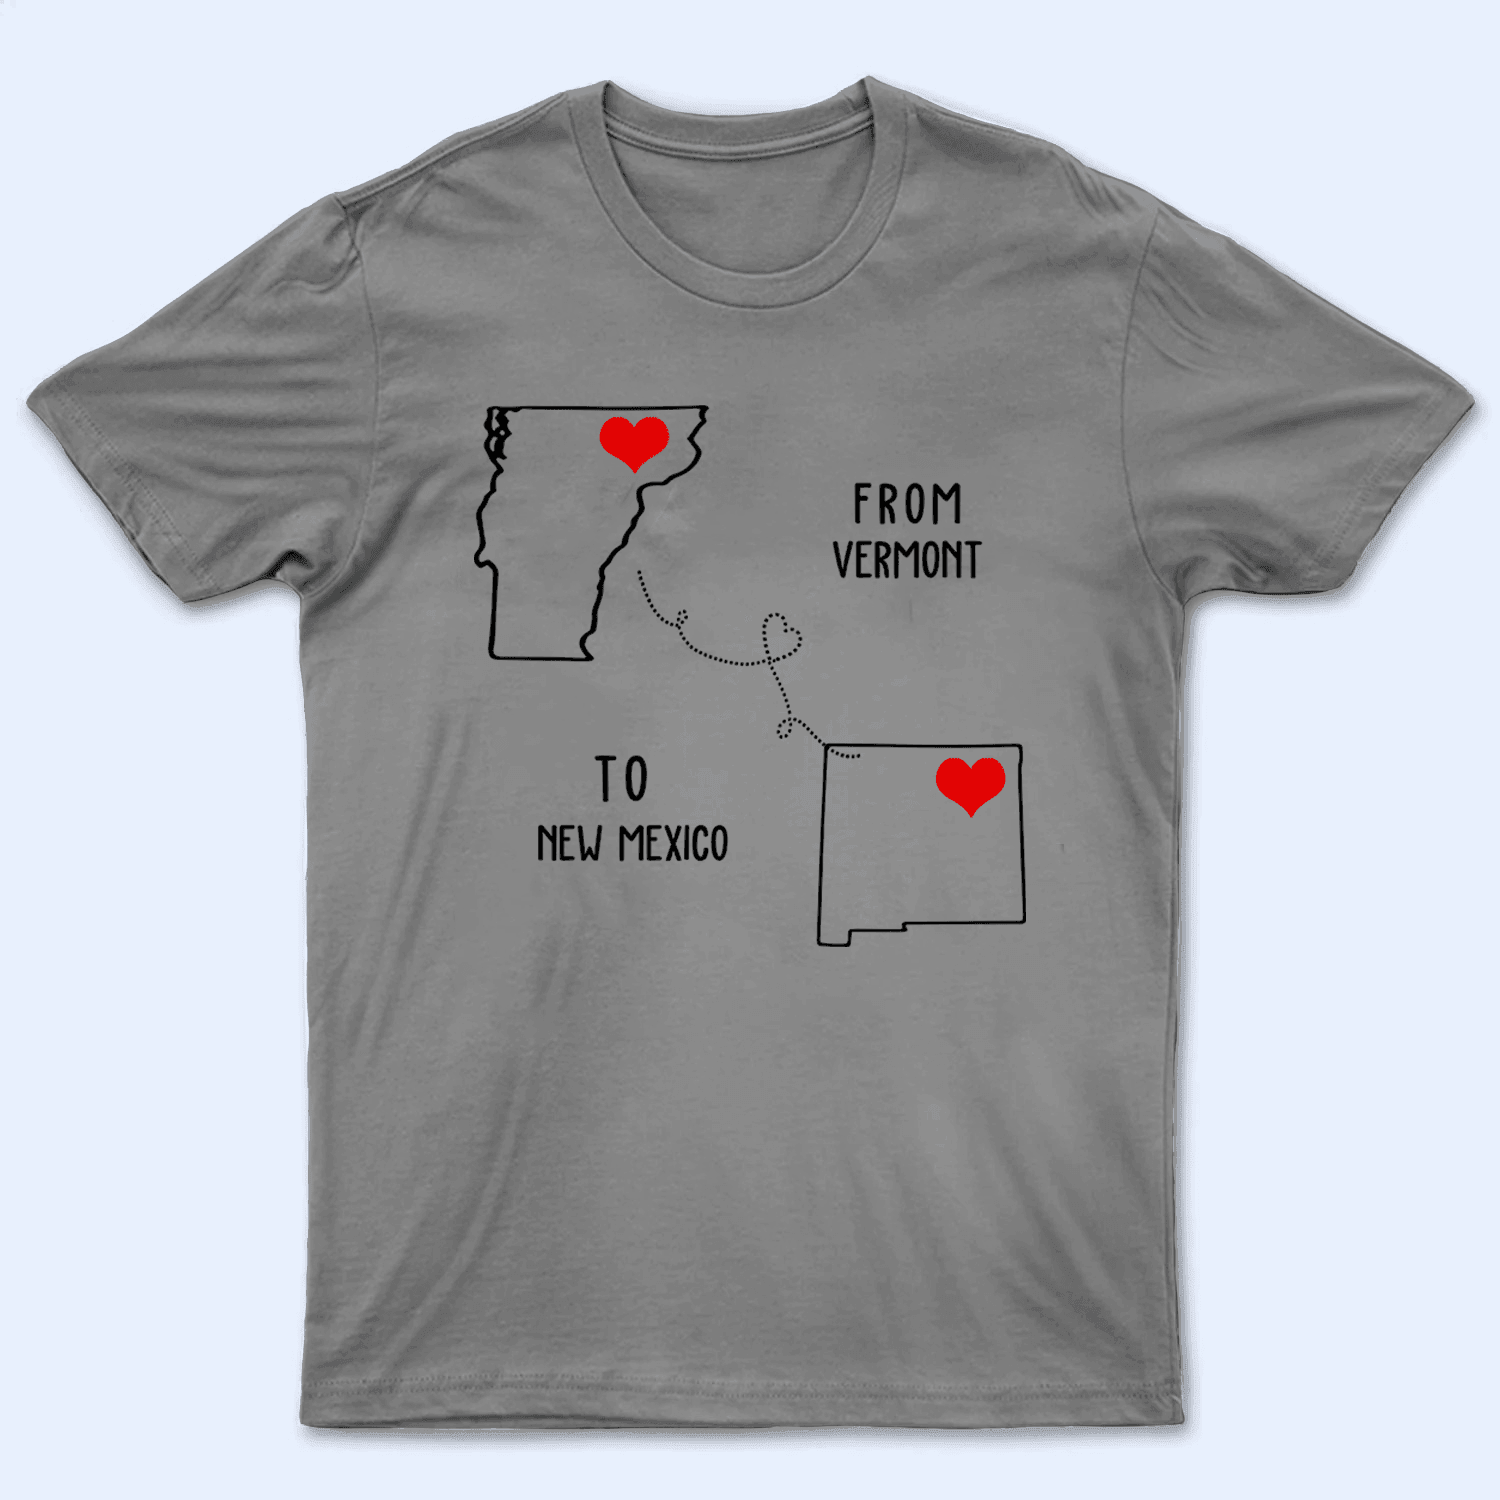 State to State Long Distance Love - Personalized Custom T Shirt - Gift for Families/Couples/Friends/Grandma/Grandparents - Suzitee Store